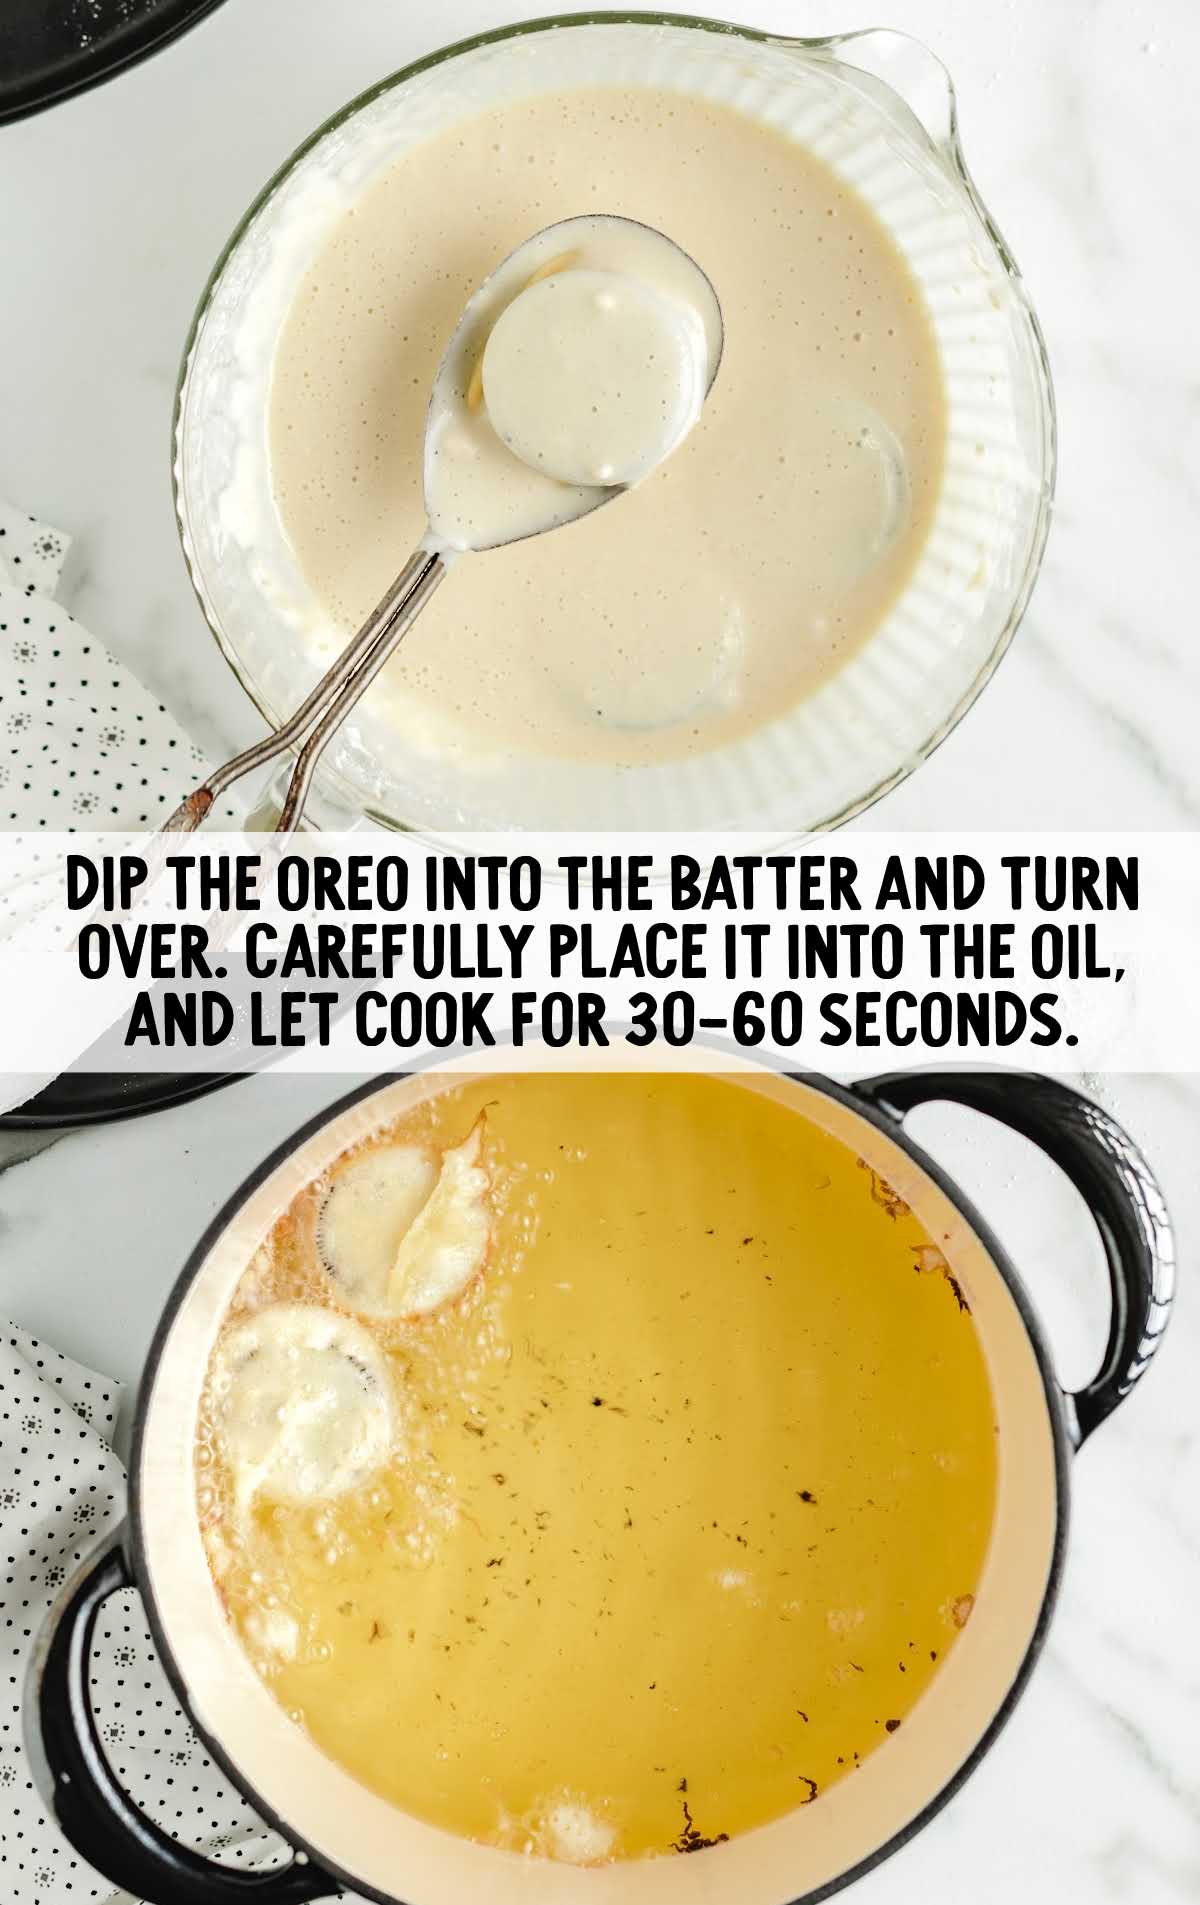 oreos dipped into a bowl of batter then dropped into a pot of hot oil